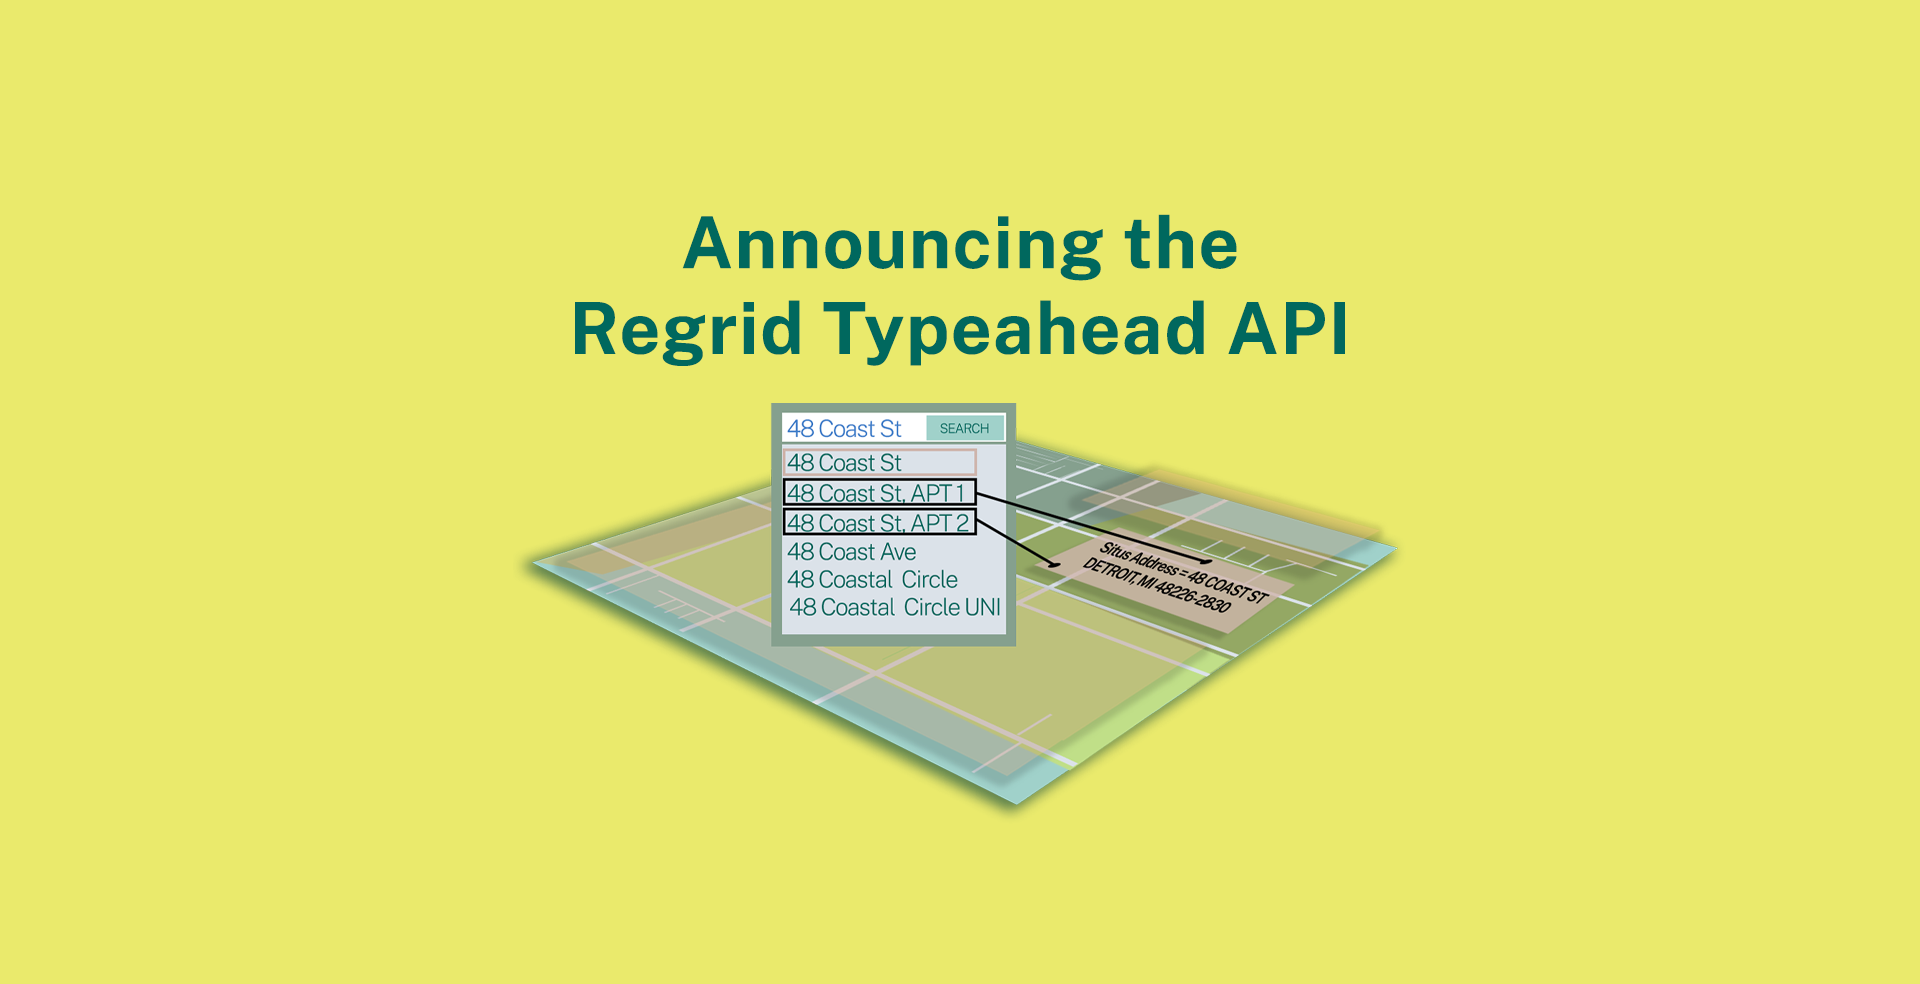 Announcing the Regrid Typeahead API